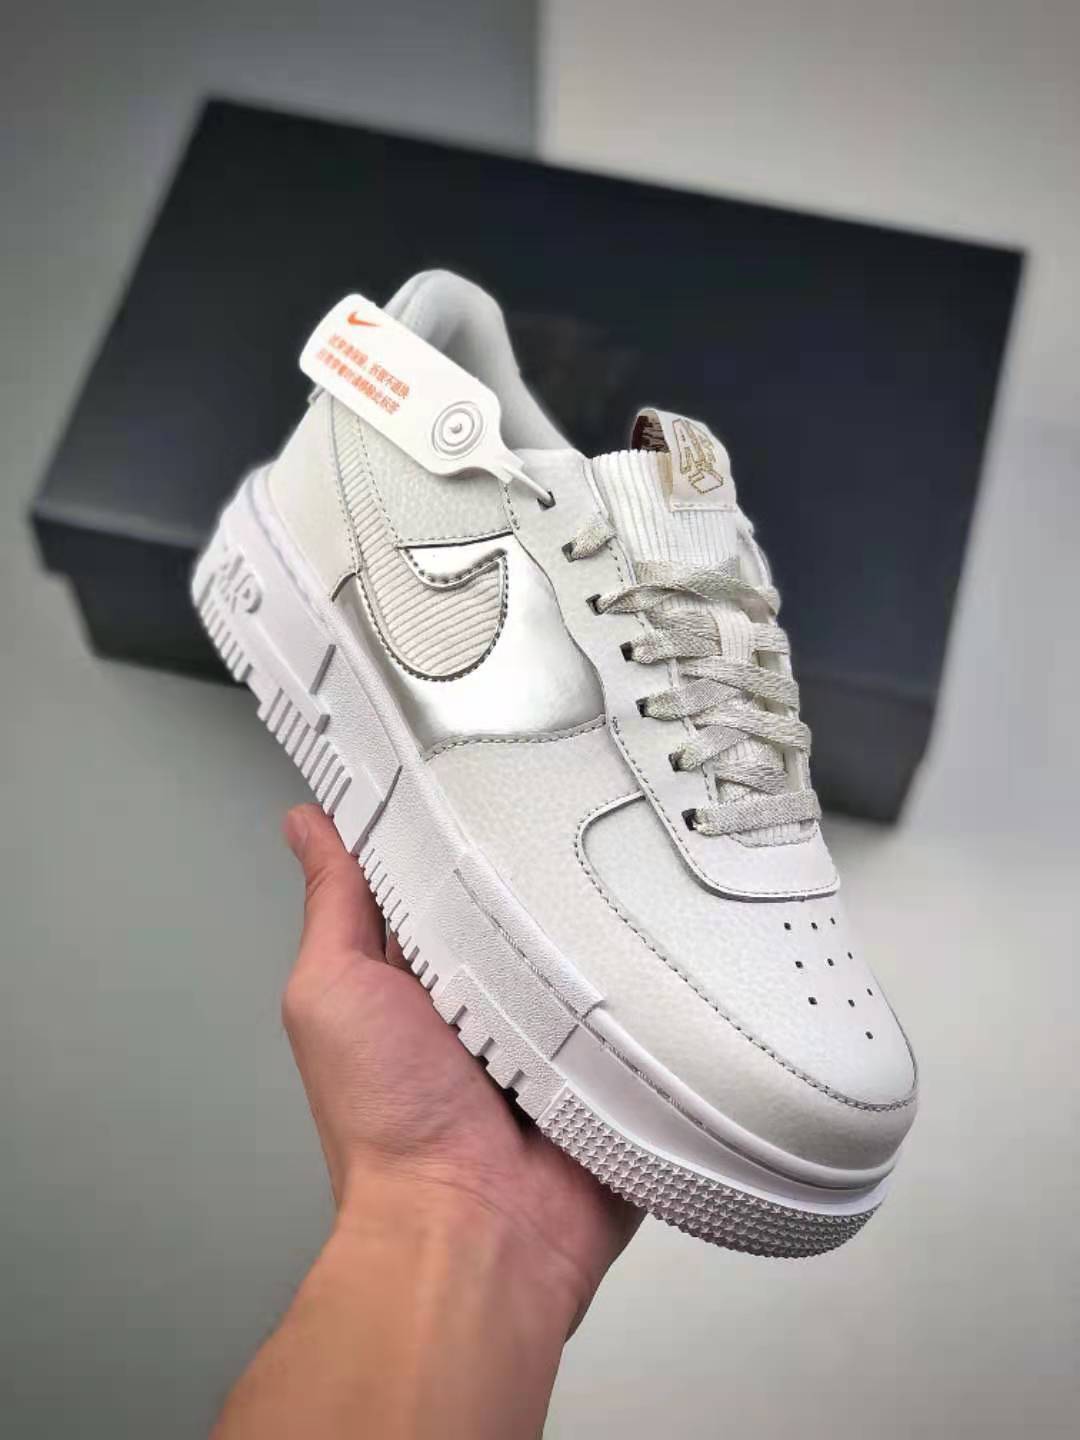 Nike Air Force 1 Pixel 'White Gold Chain' DC1160-100 - Stylish and Chic Footwear